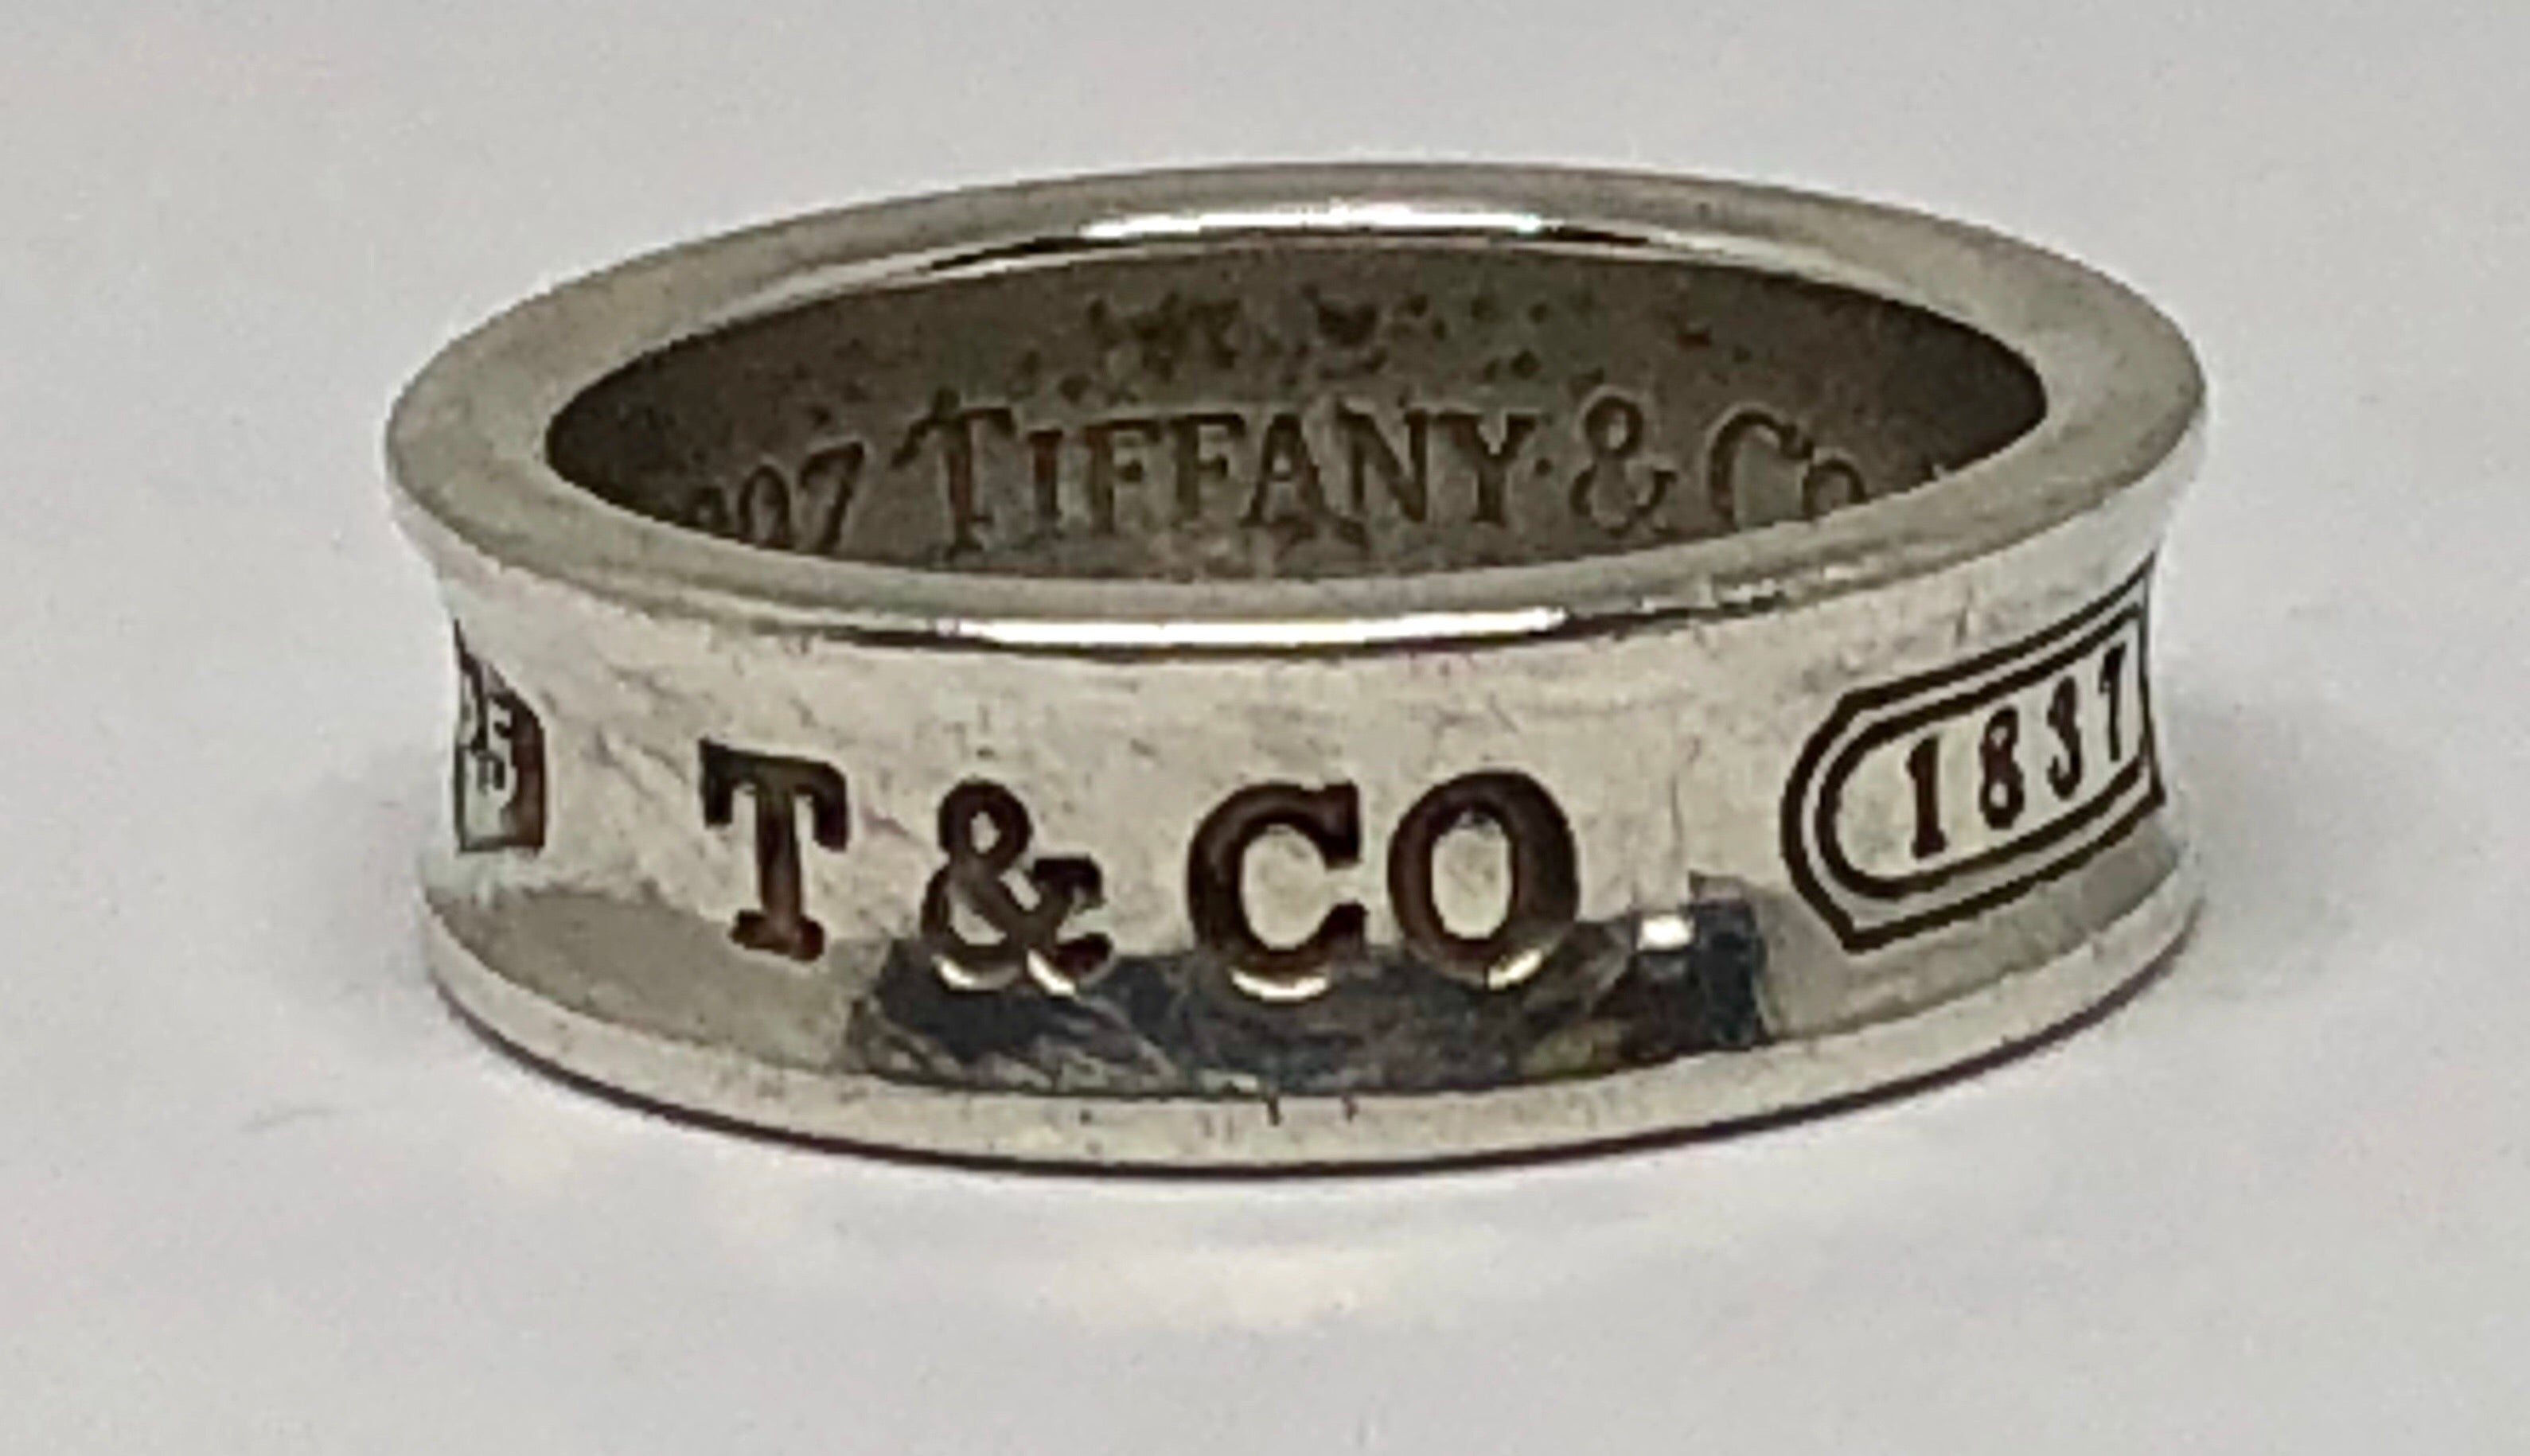 Tiffany & Co Sterling Silver Concave 1837 Band Ring Size 7.5